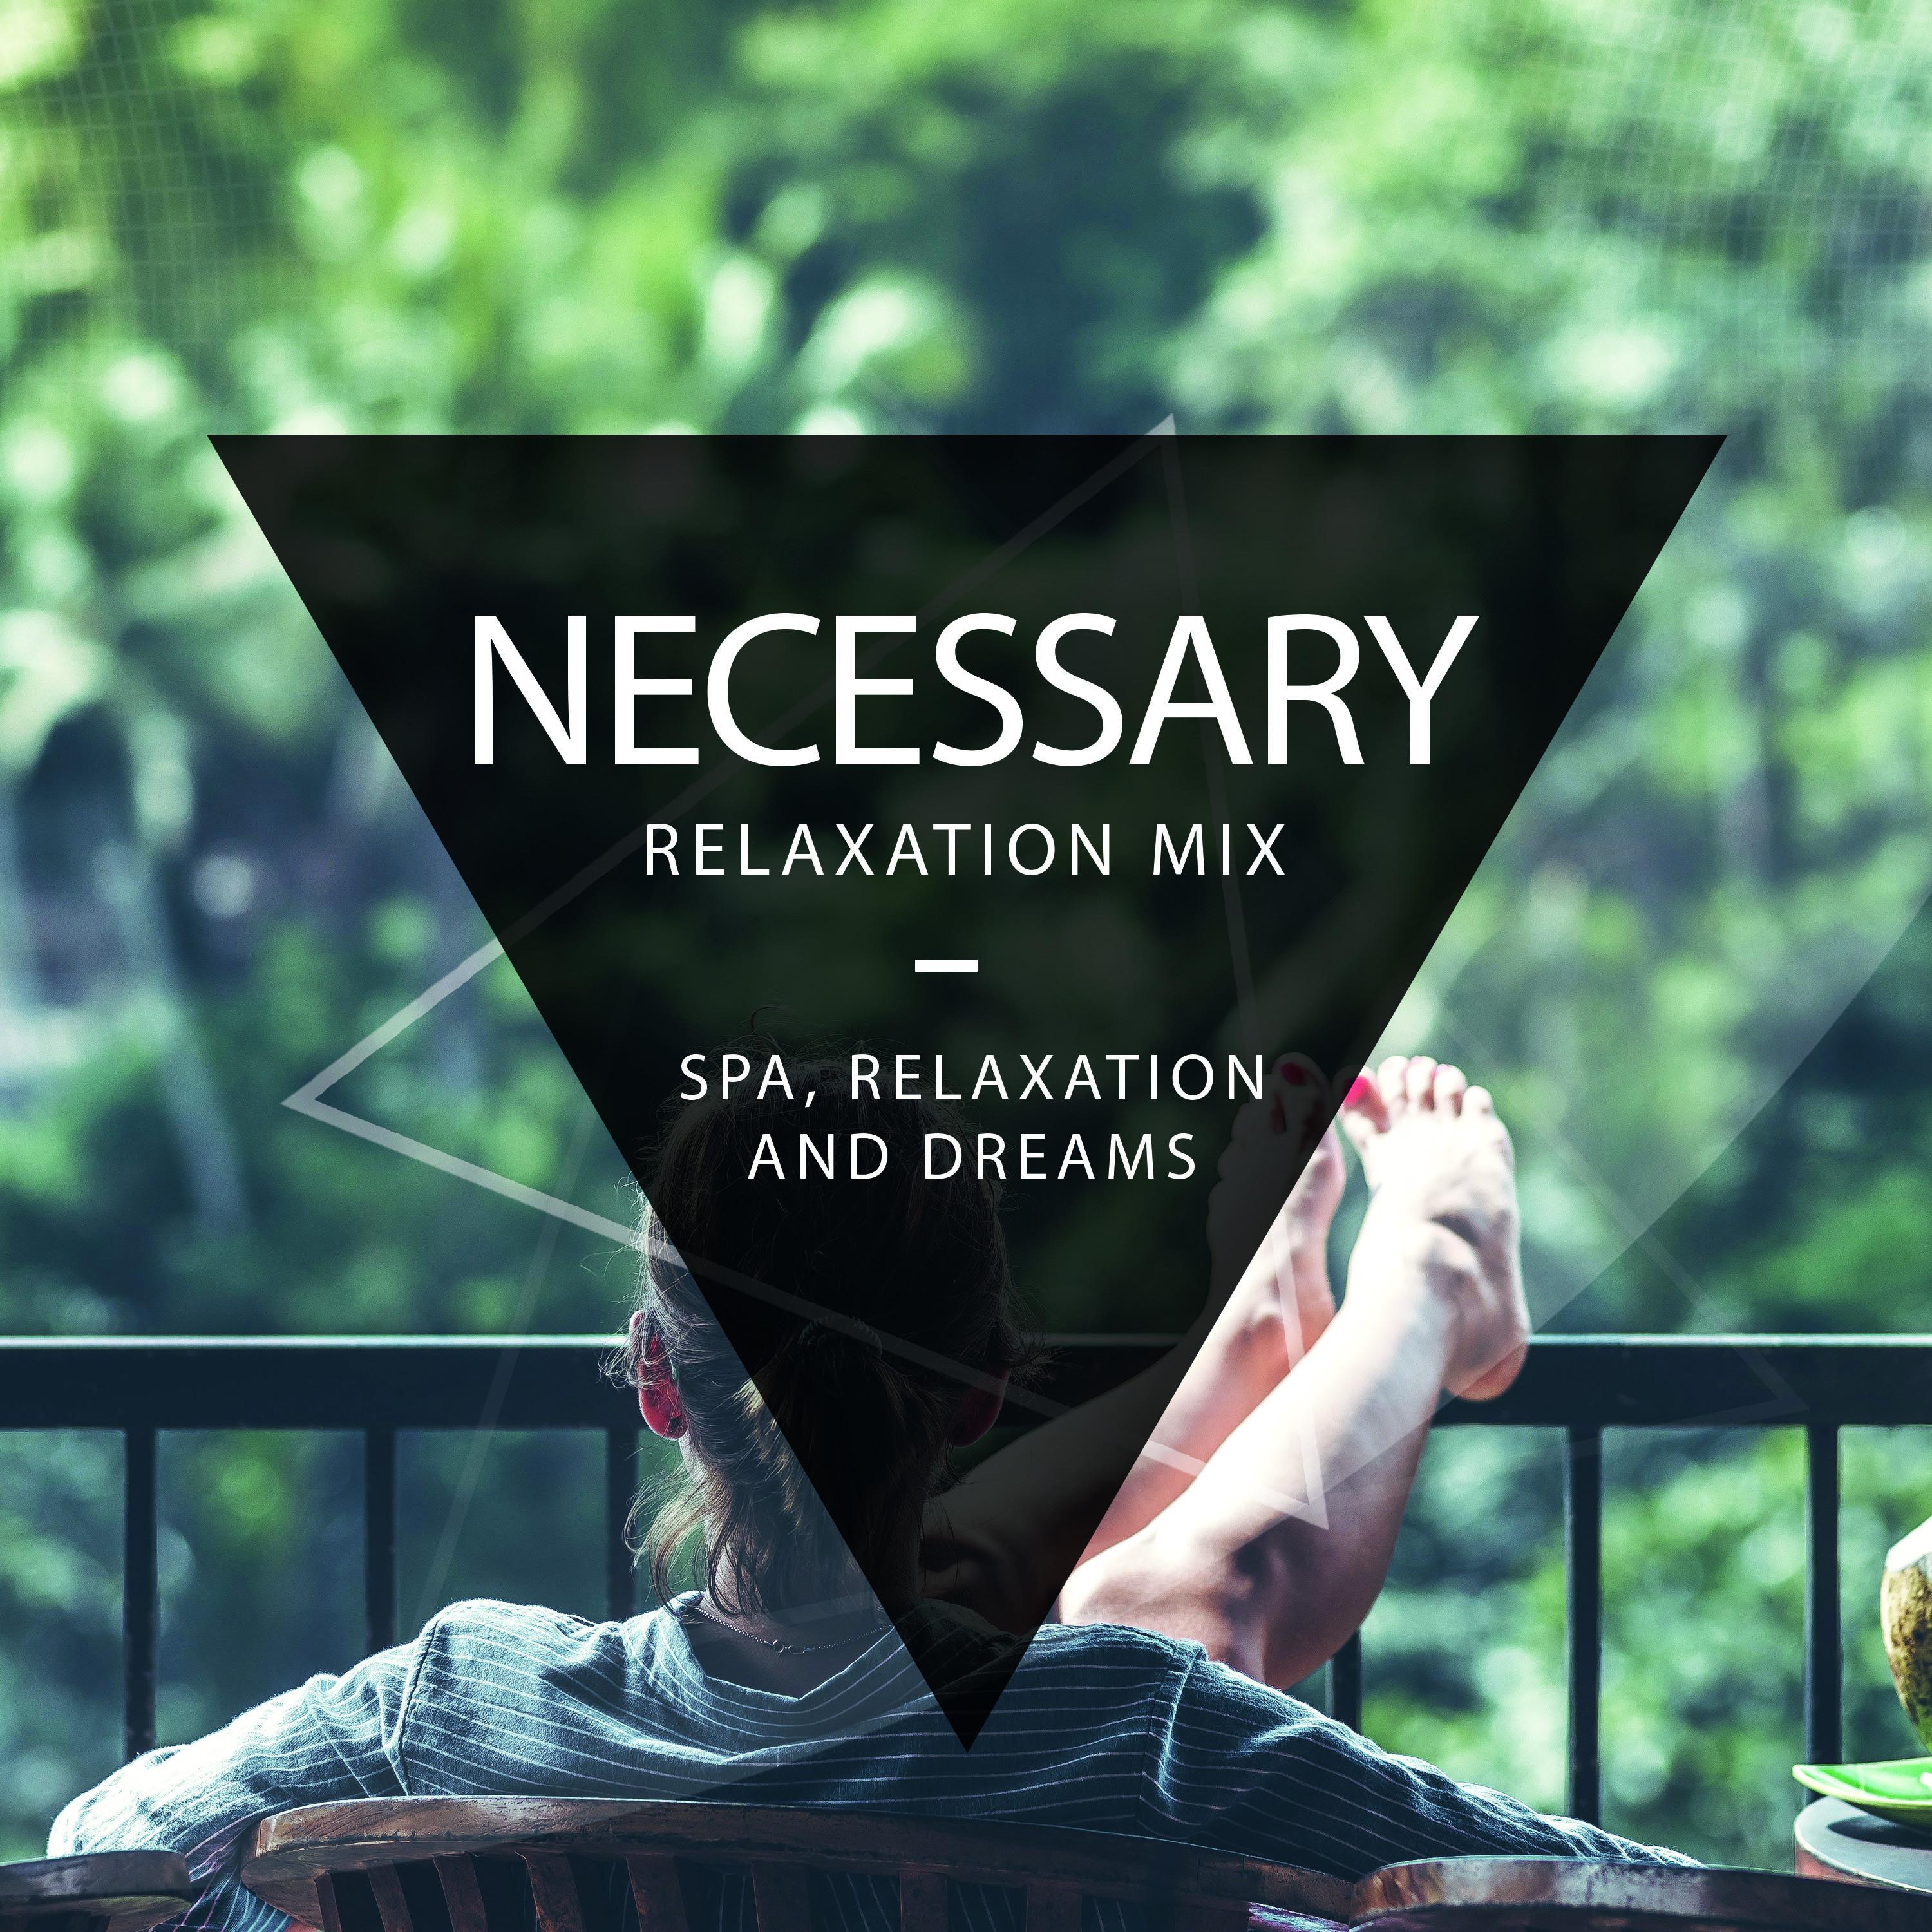 Necessary Relaxation Mix